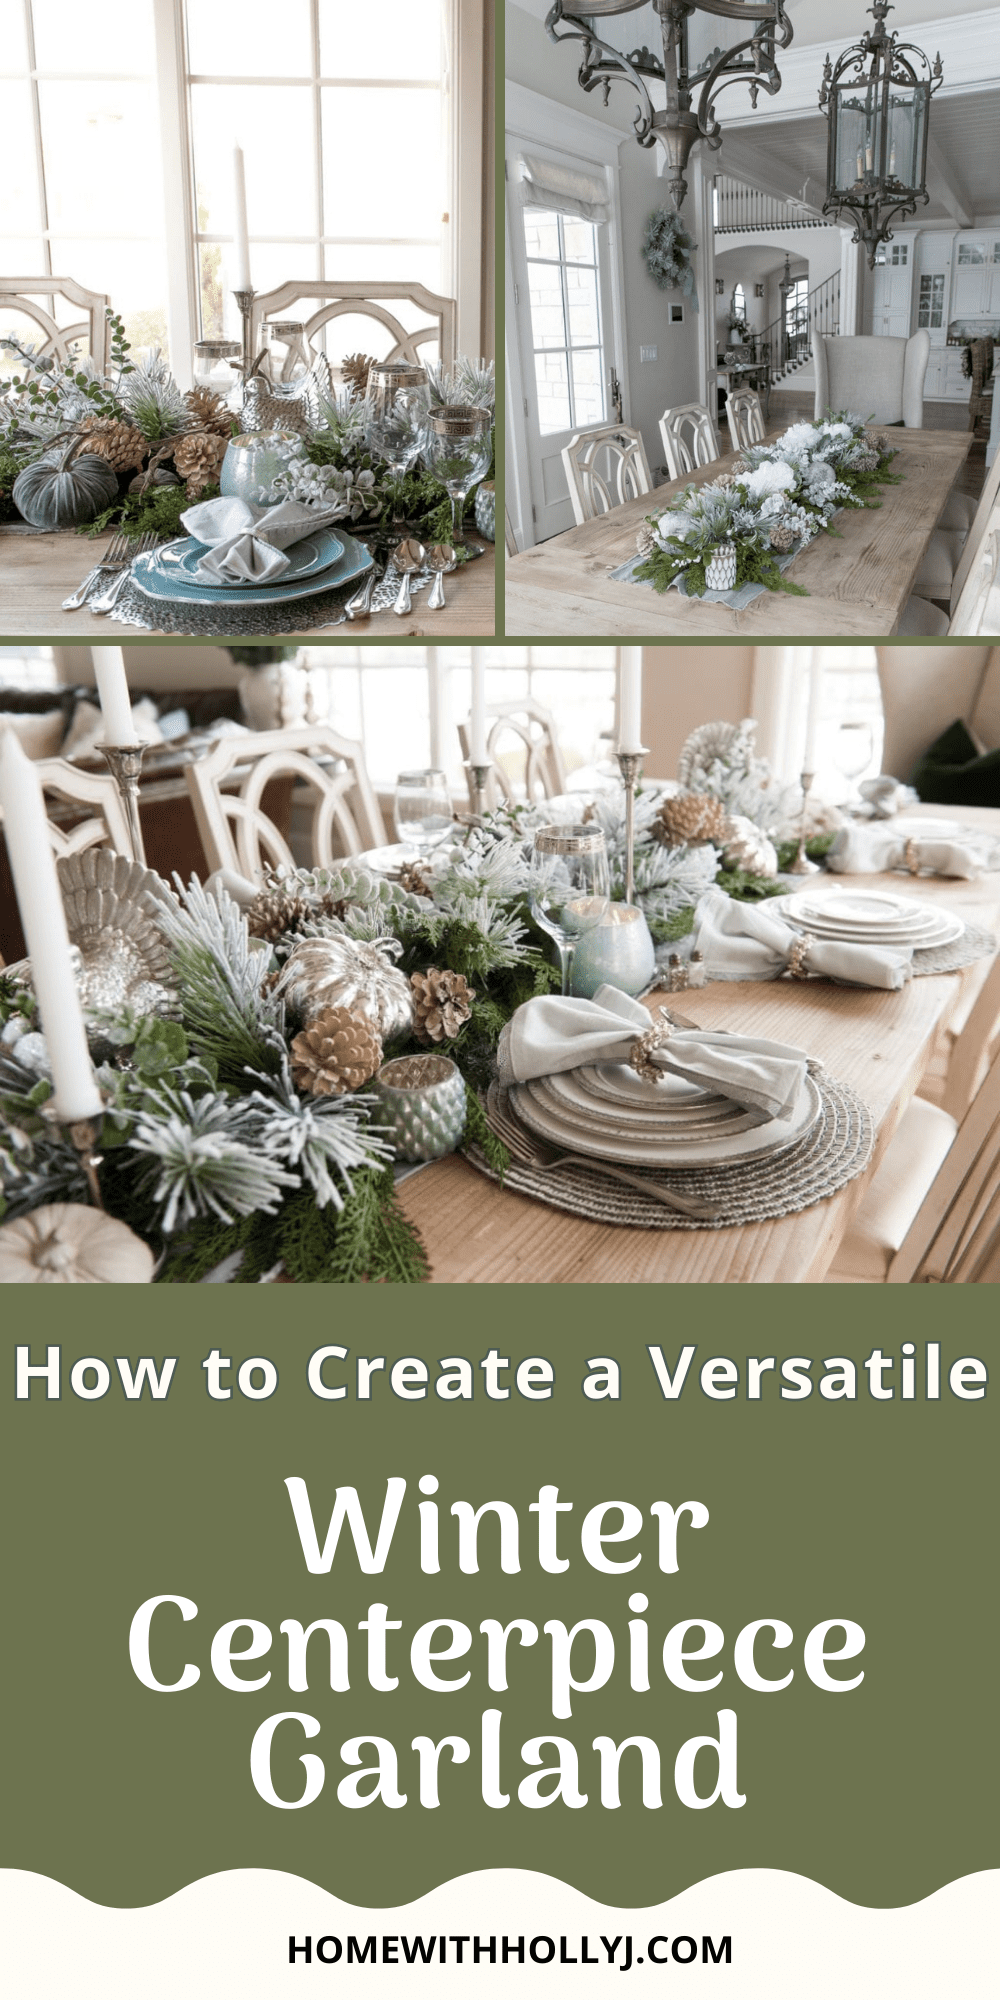 Sharing how to create a beautiful winter centerpiece garland for a festive piece of your winter decorations.